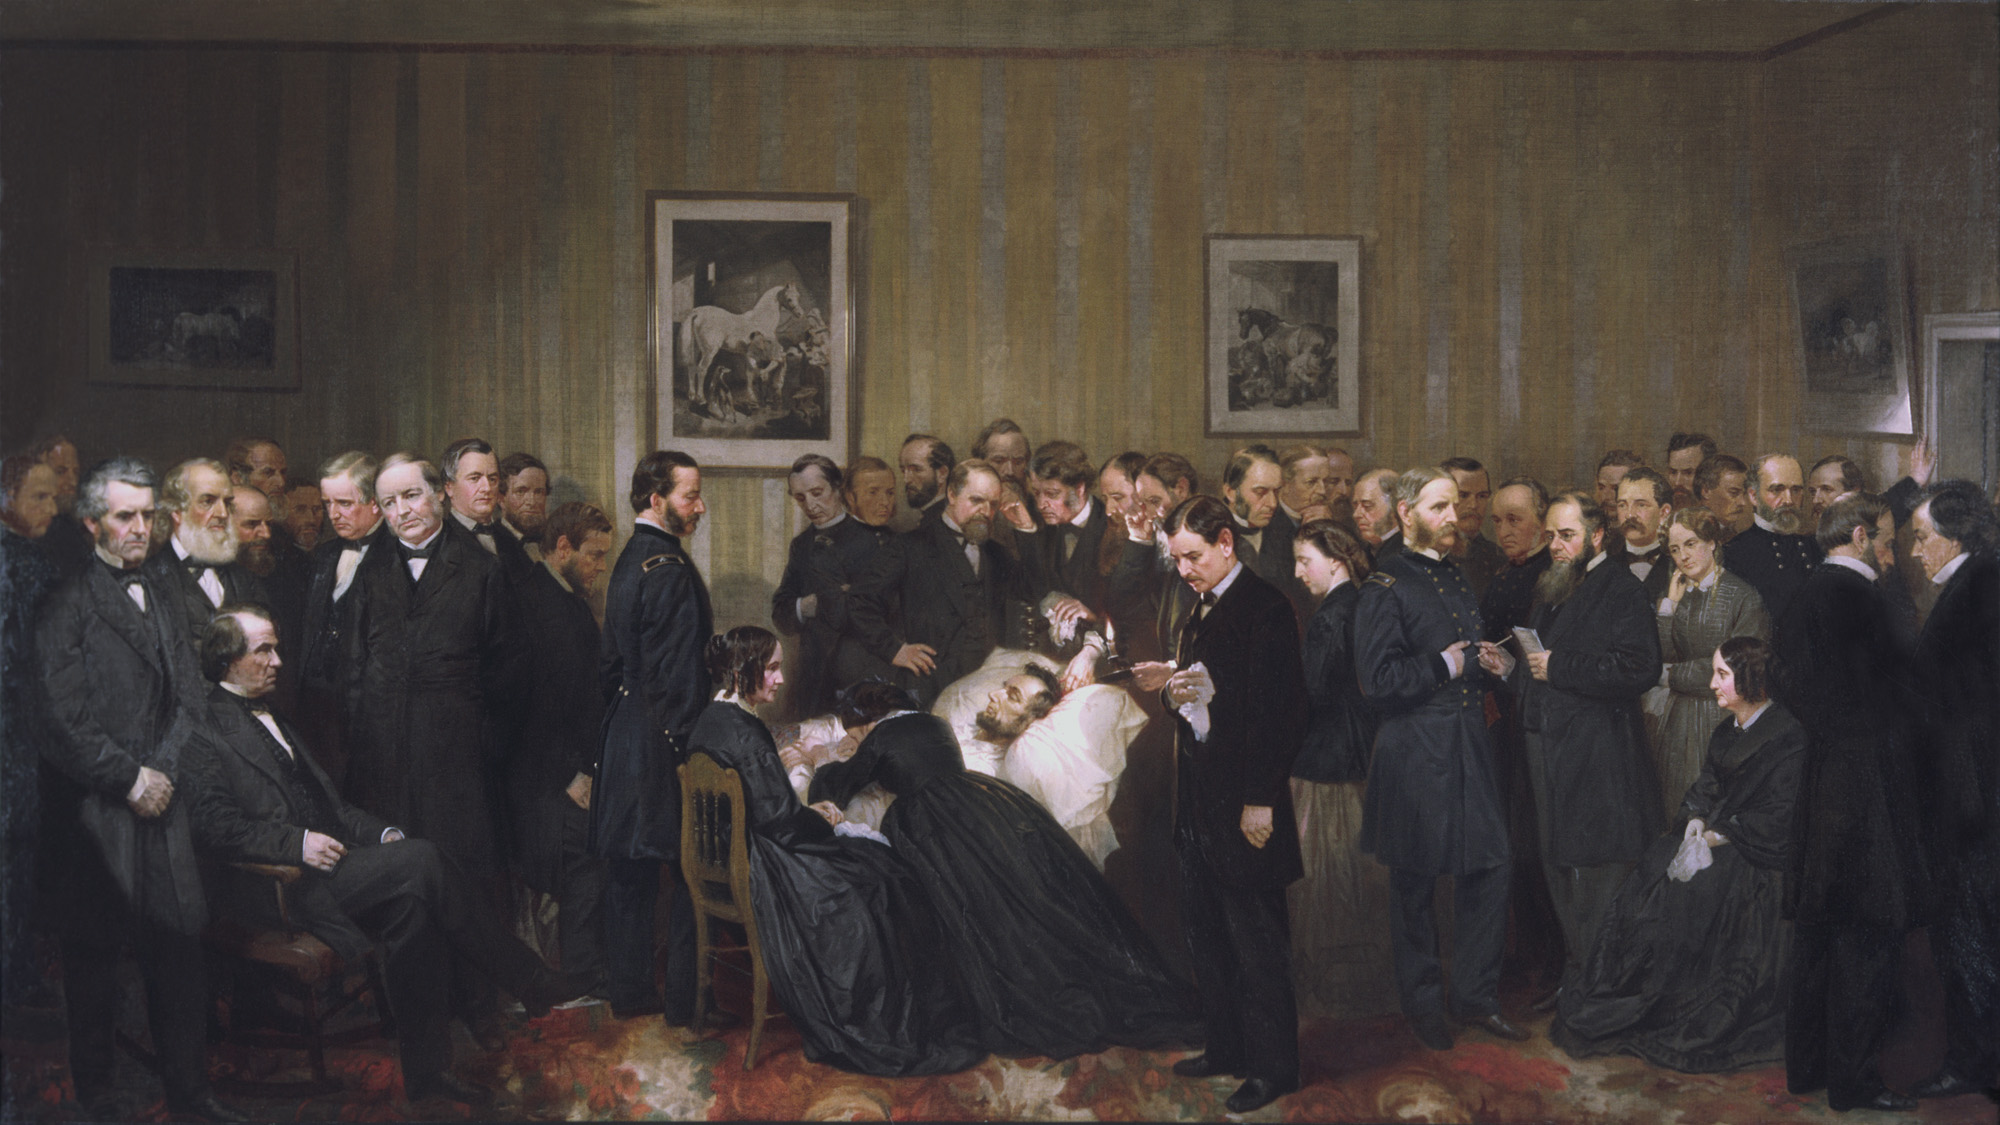 Alonzo Chappel, <em>The Last Hours of Abraham Lincoln</em>, 1868, oil on canvas, 52 x 98 inches (Chicago History Museum)